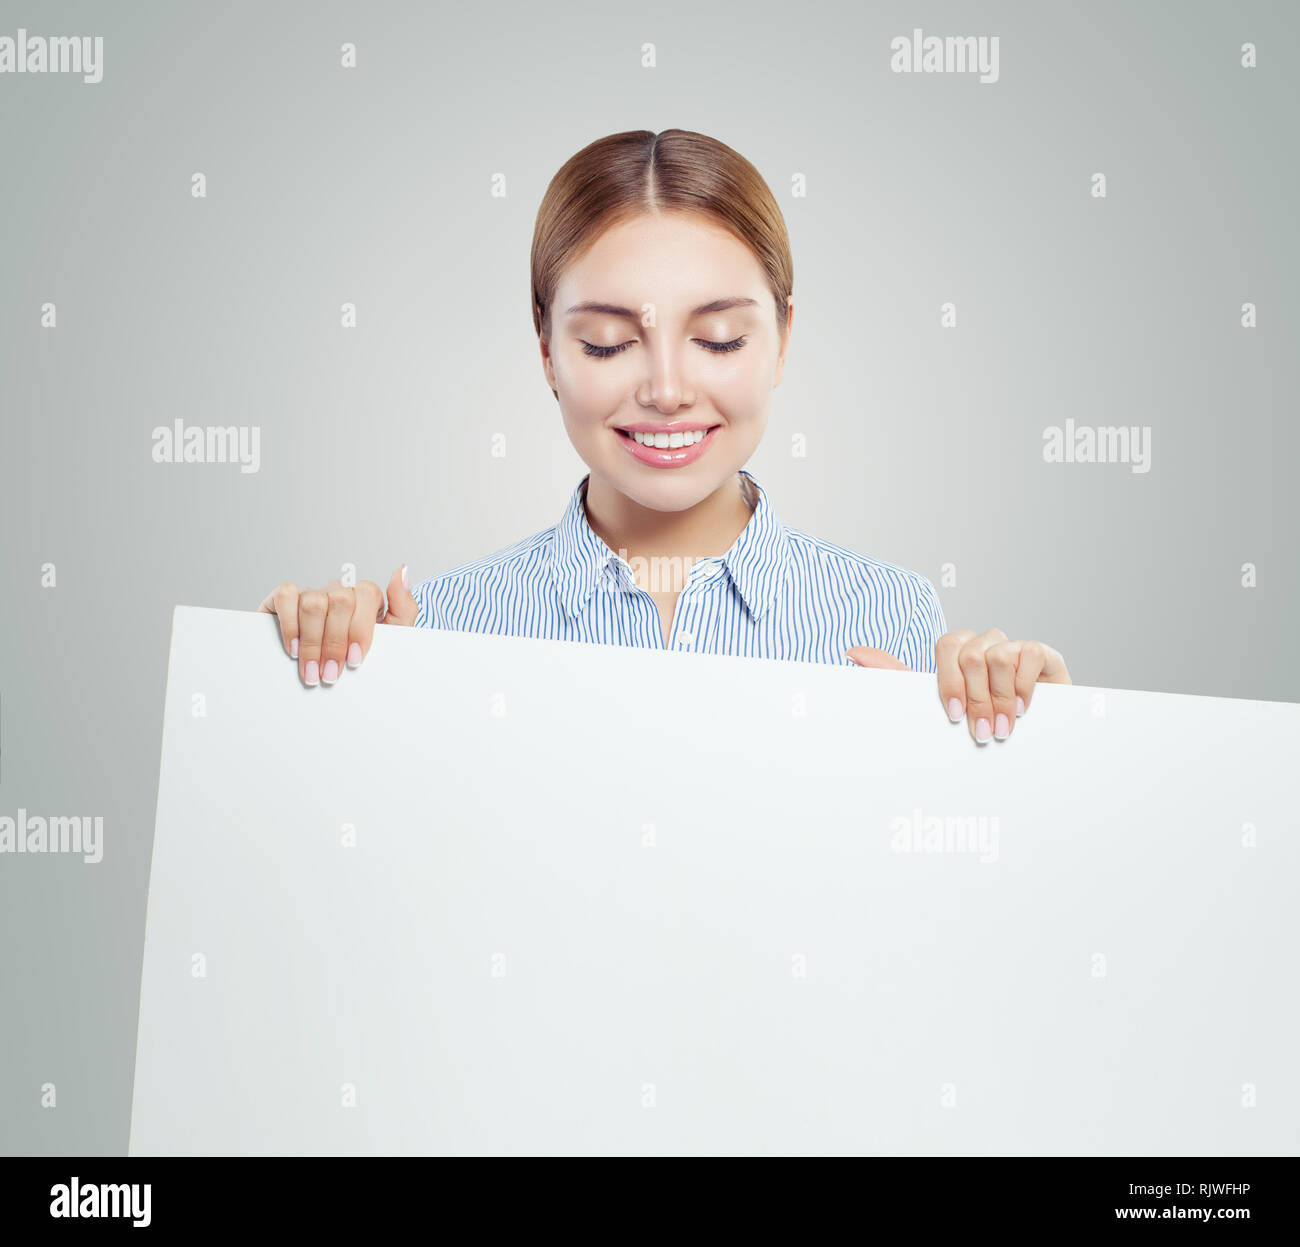 Young smiling woman showing white empty paper banner background with copy space. Happy woman portrait, business and education concept Stock Photo